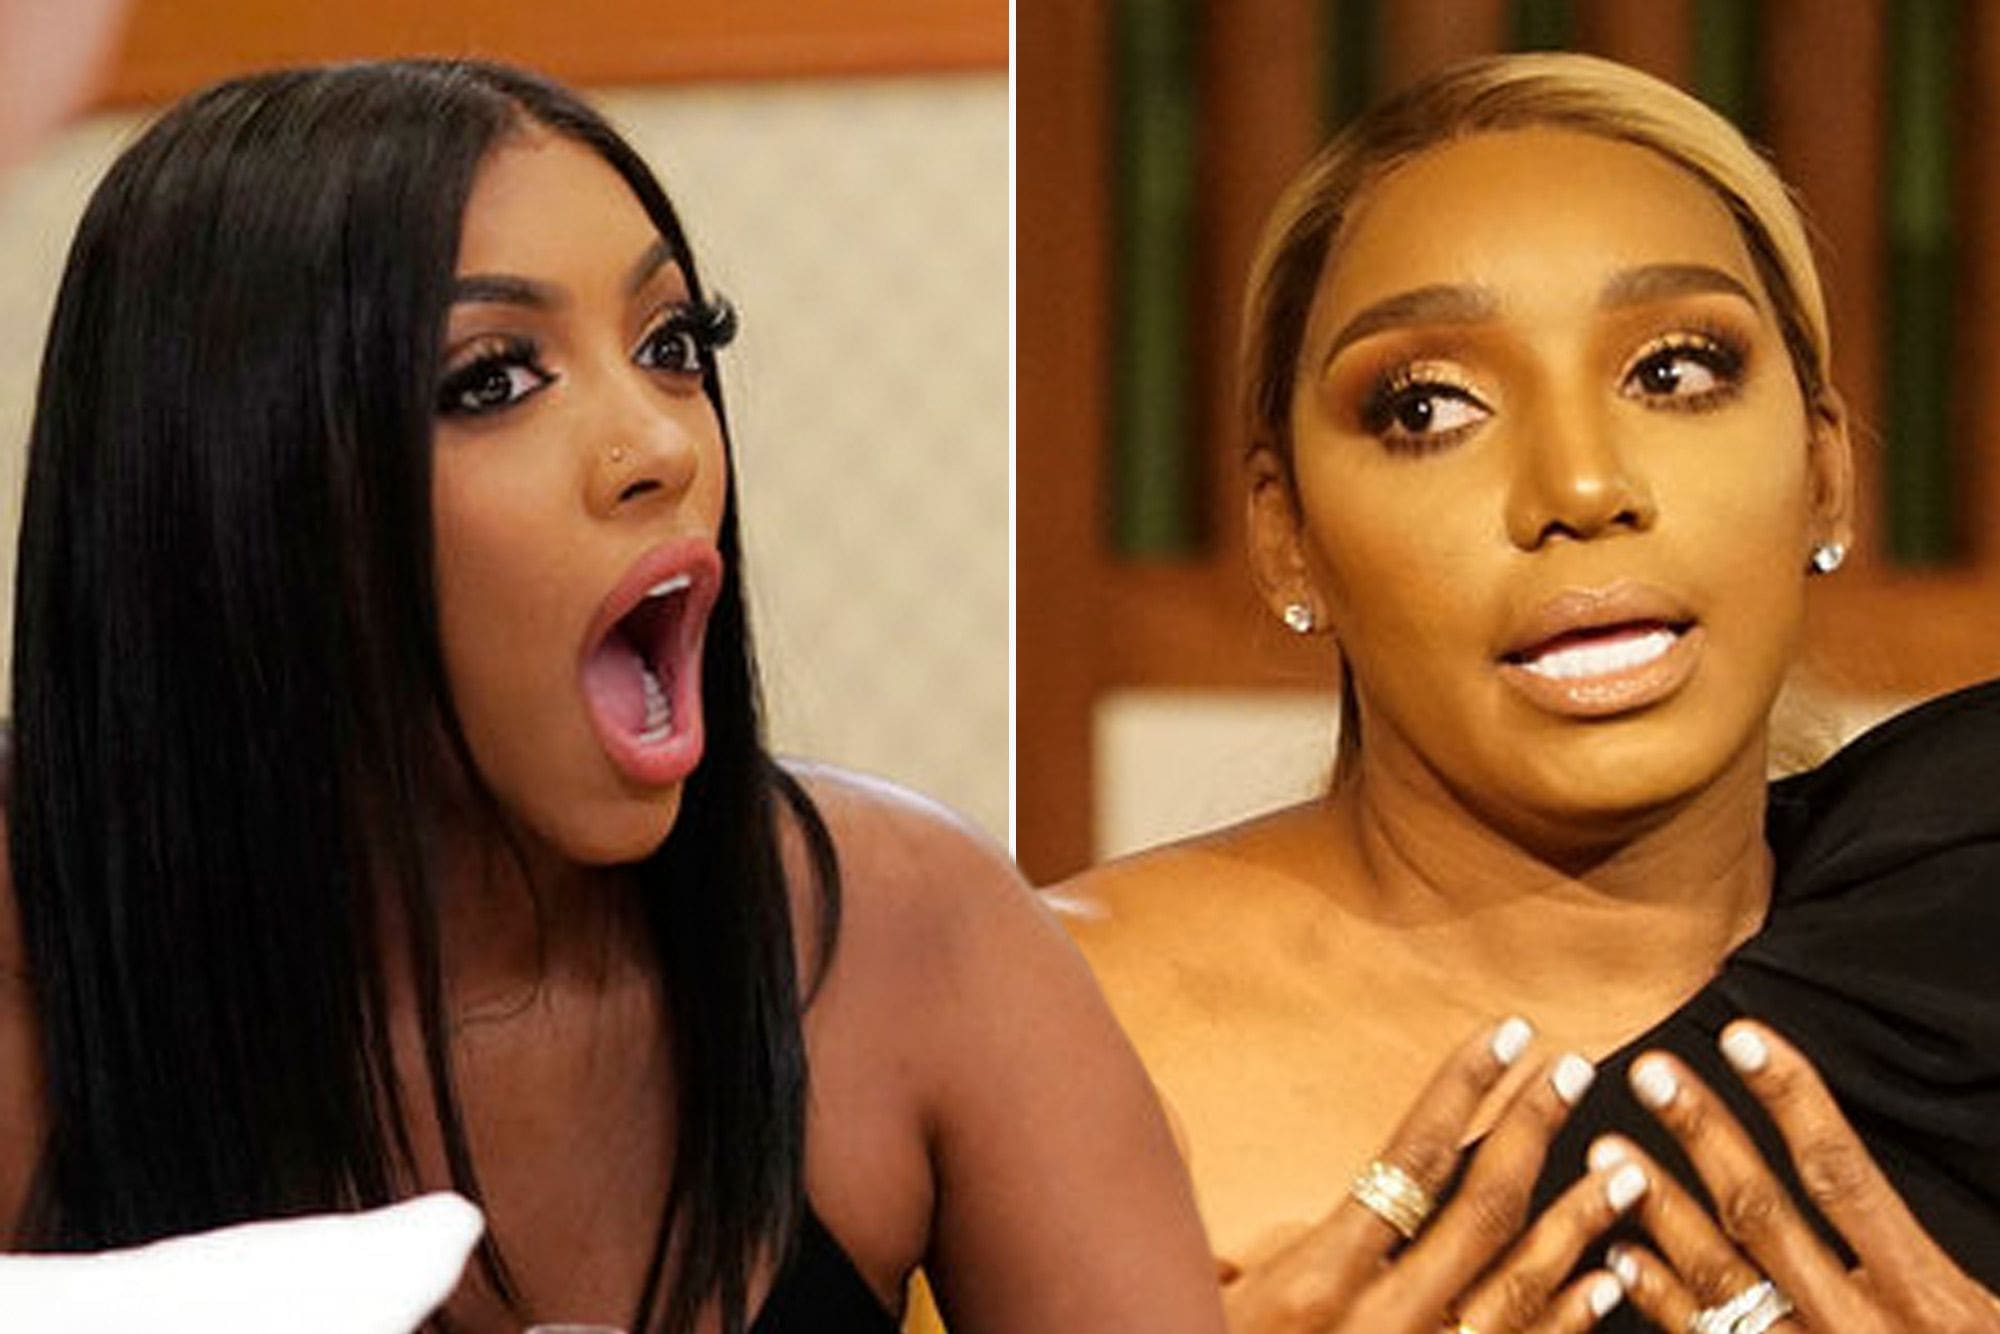 Porsha Williams' Friends Want Her To End Her Feud With NeNe Leakes